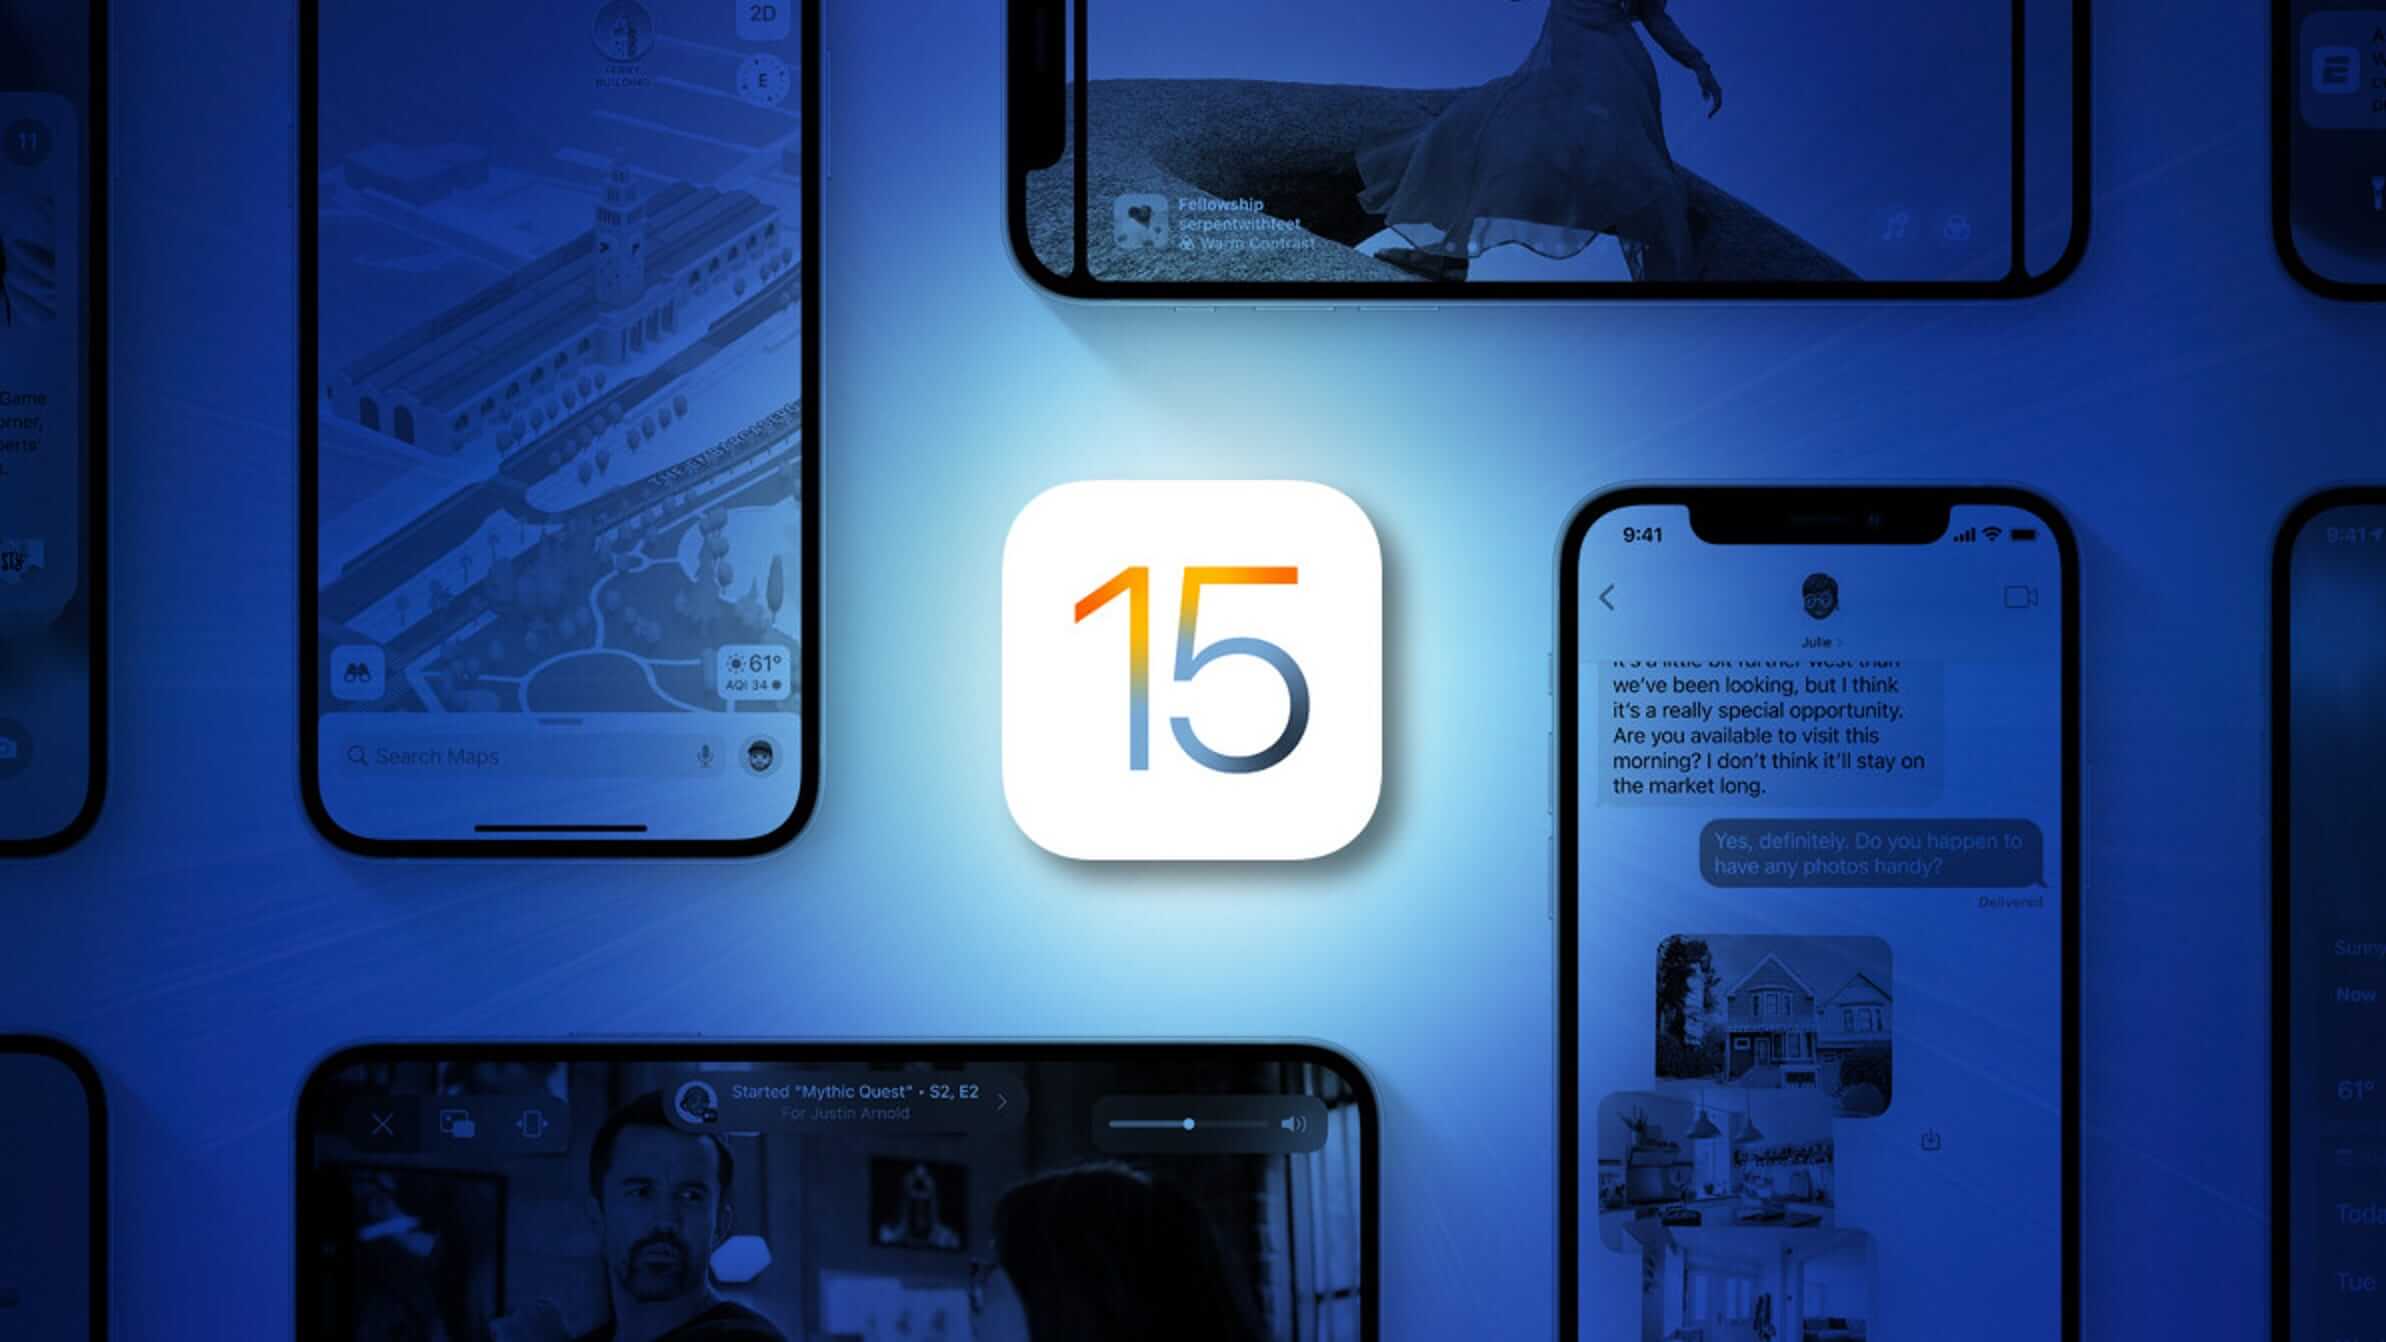 Forced to iOS 15? Apple stops releasing security updates for iOS 14